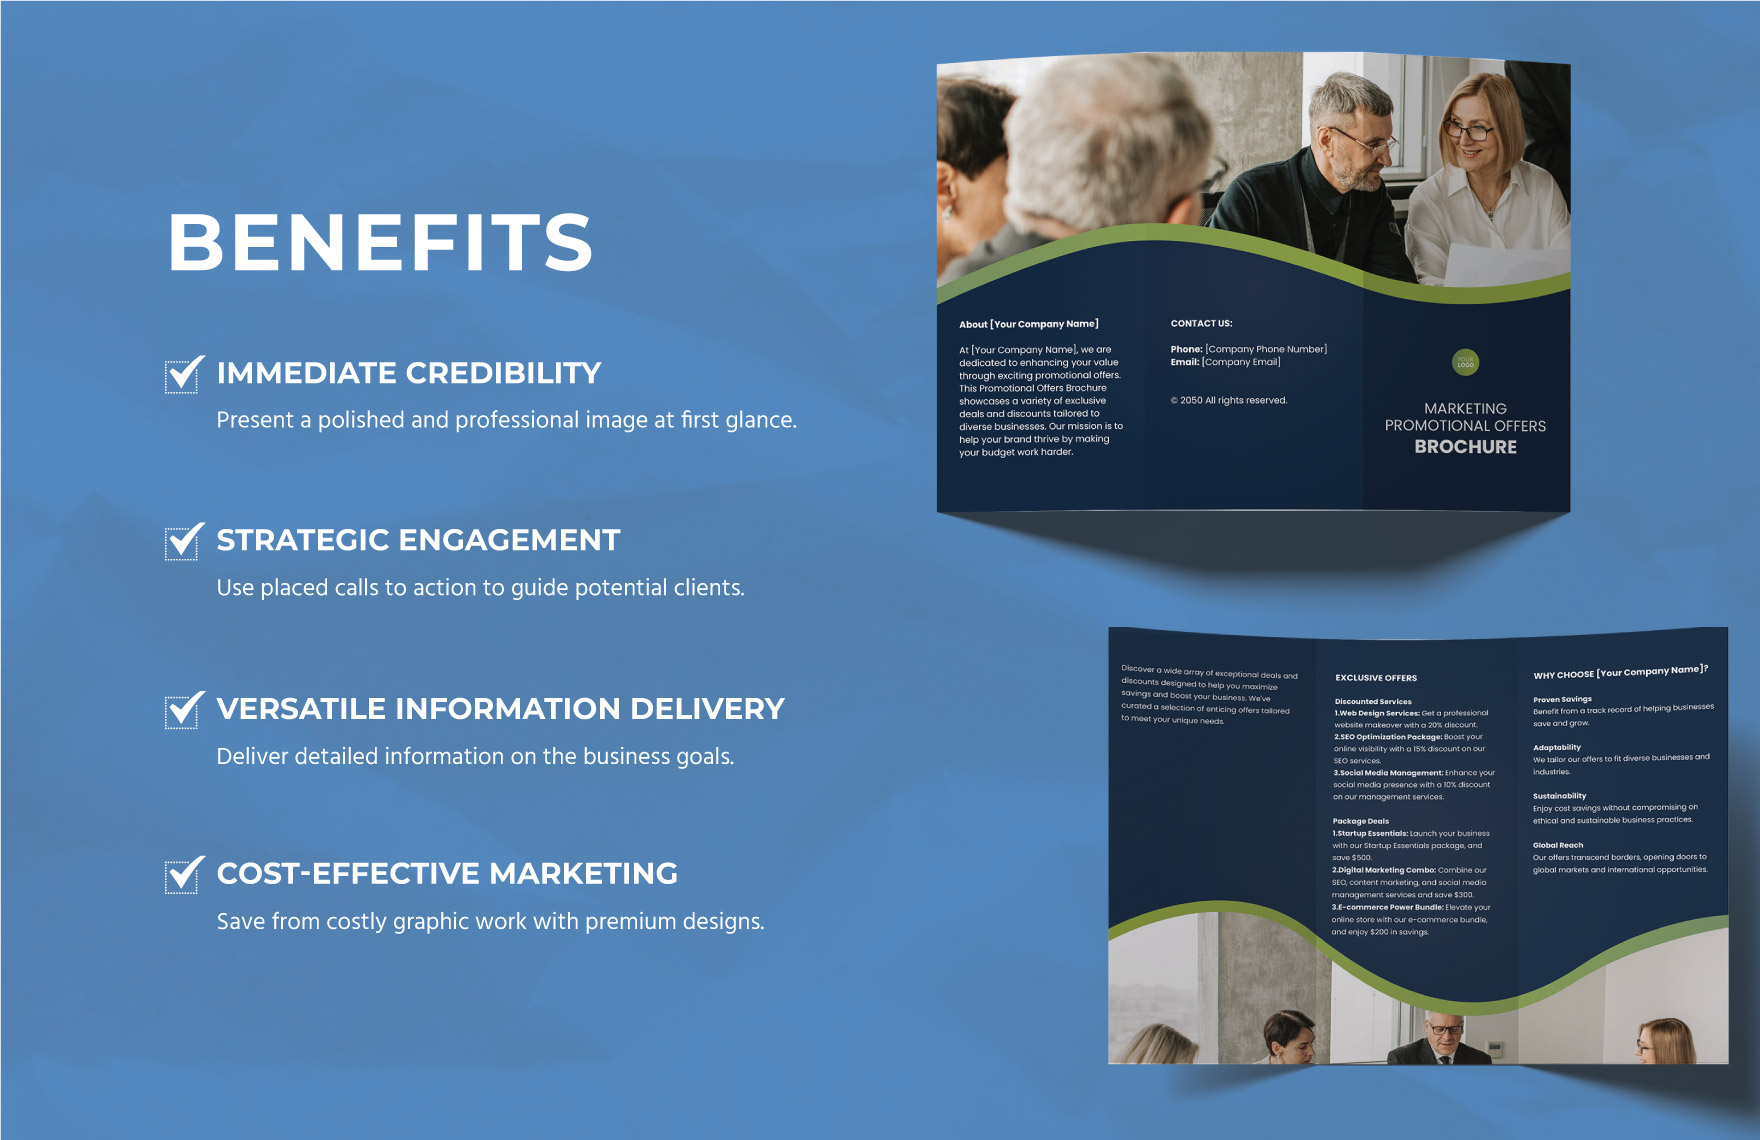 Marketing Promotional Offers Brochure Template